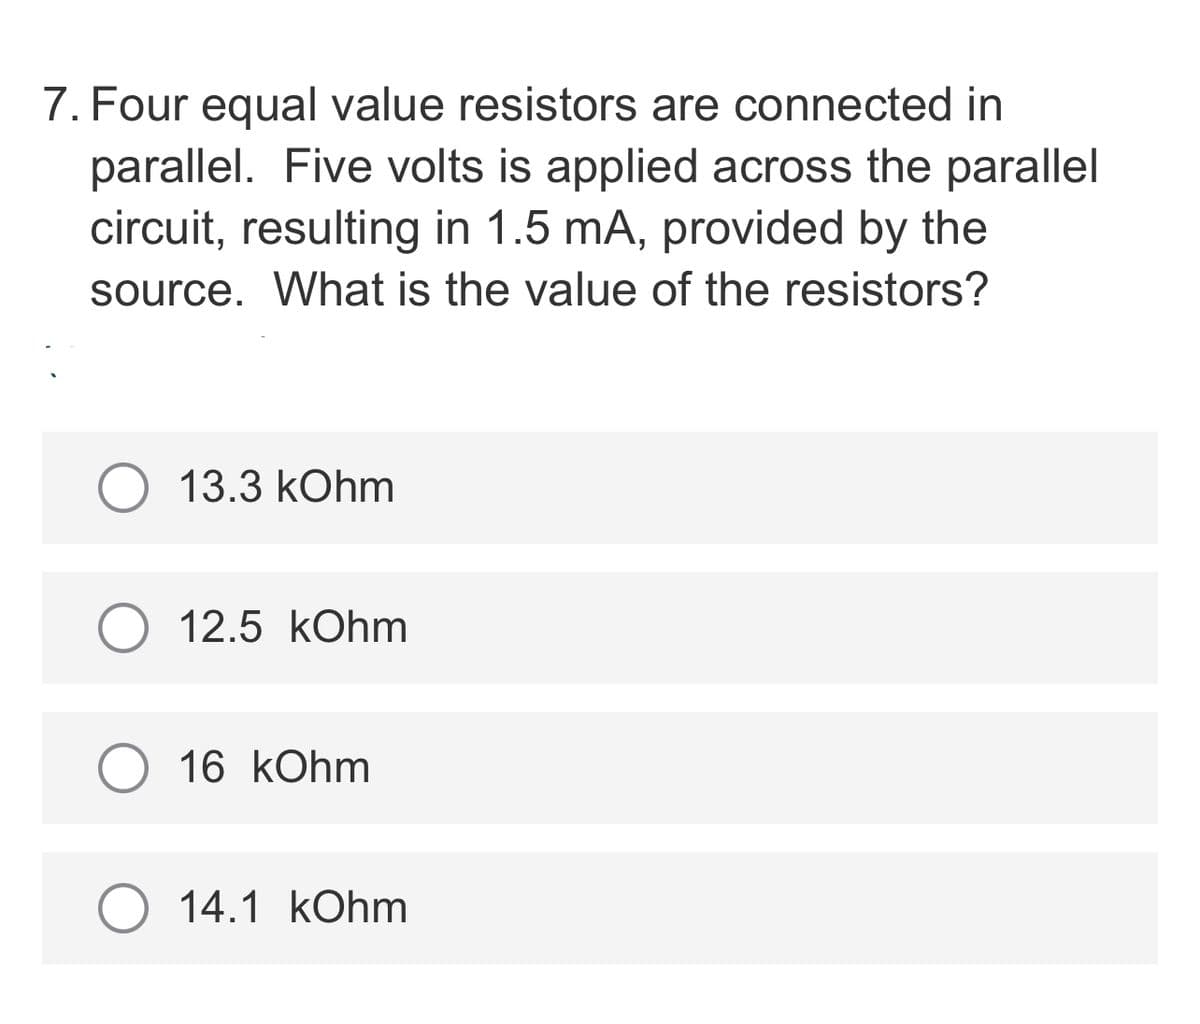 7. Four equal value resistors are connected in
parallel. Five volts is applied across the parallel
circuit, resulting in 1.5 mA, provided by the
source. What is the value of the resistors?
13.3 kOhm
12.5 kOhm
16 kOhm
14.1 kOhm
